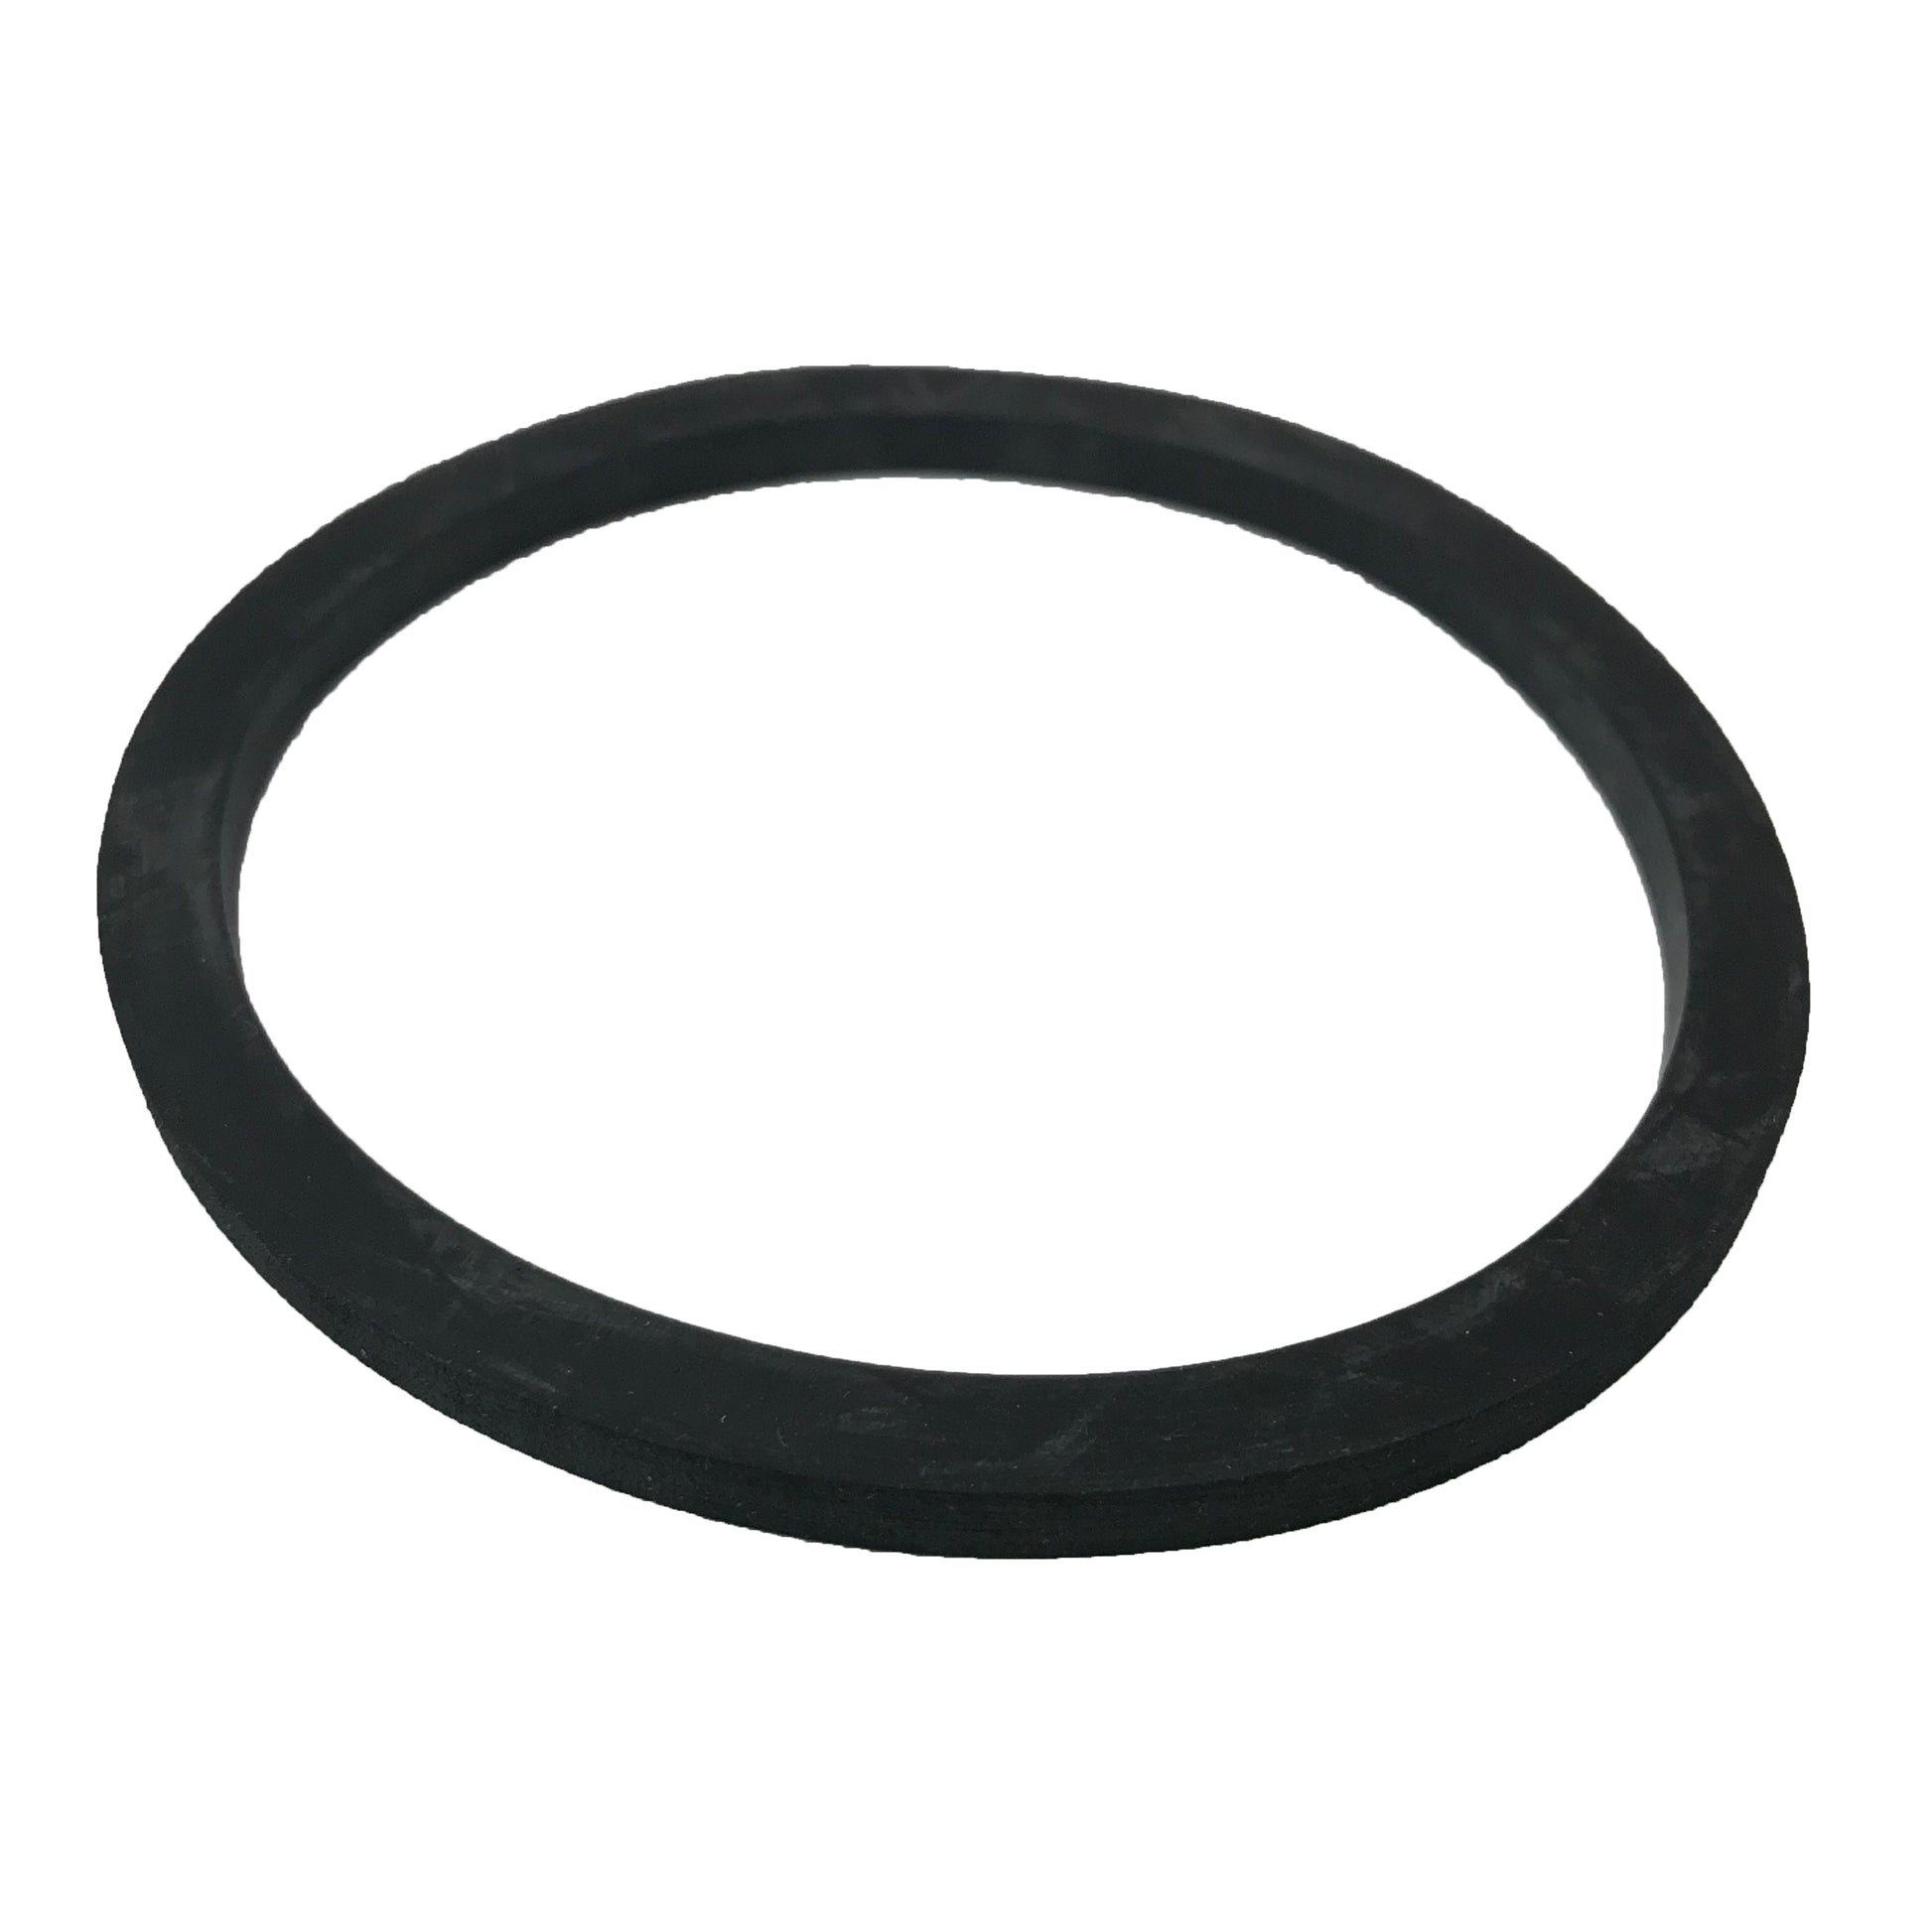 Oil Drain Plug Rubber Replacement Gasket For GM 10038854 Oil Filter Cap - 10 Pack